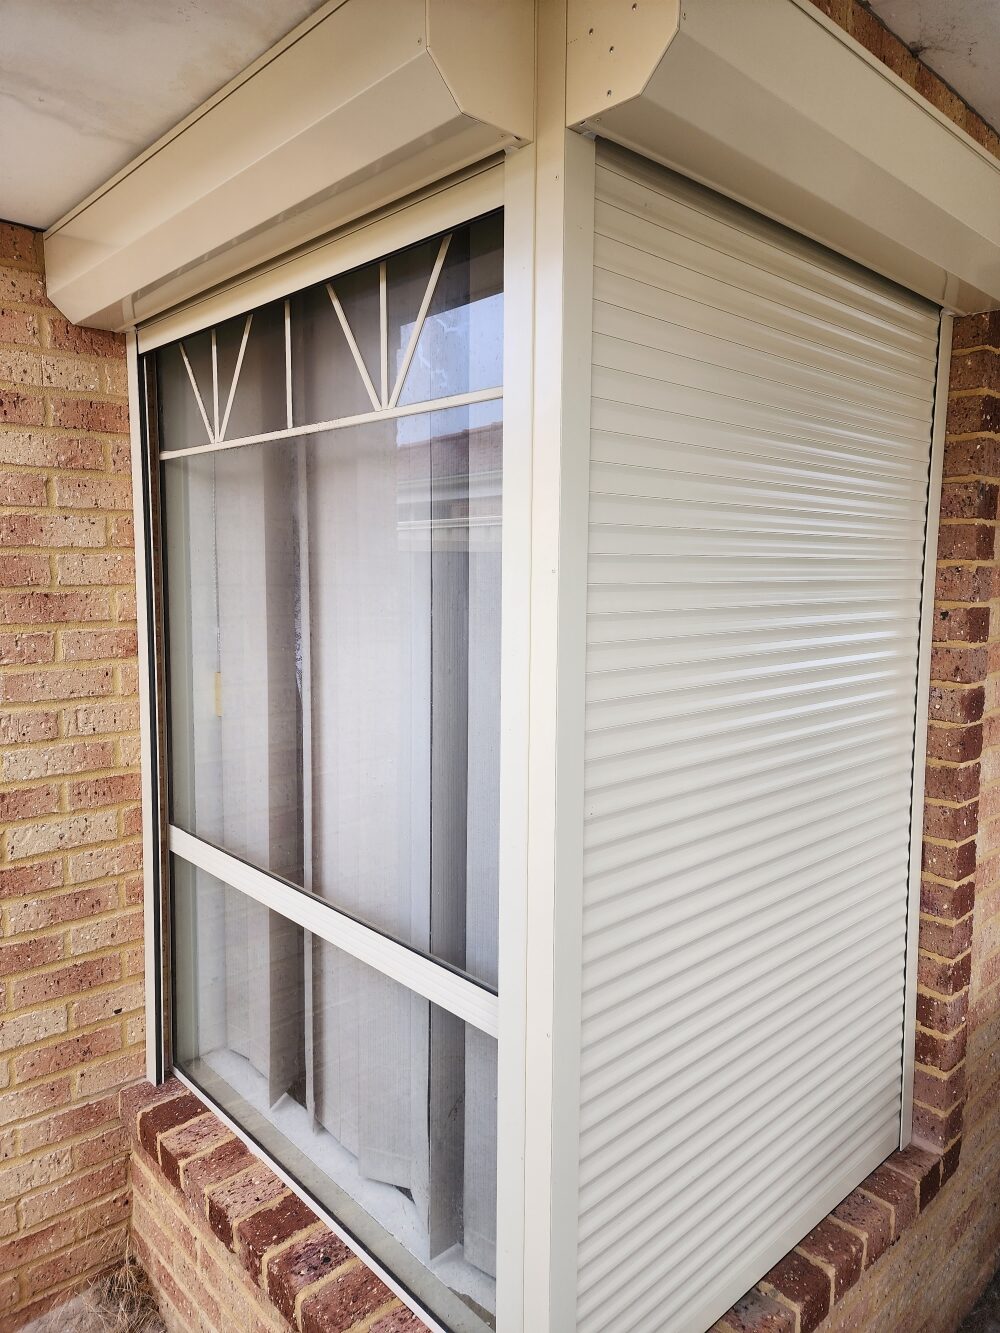 Roller Shutters Installation in Perth